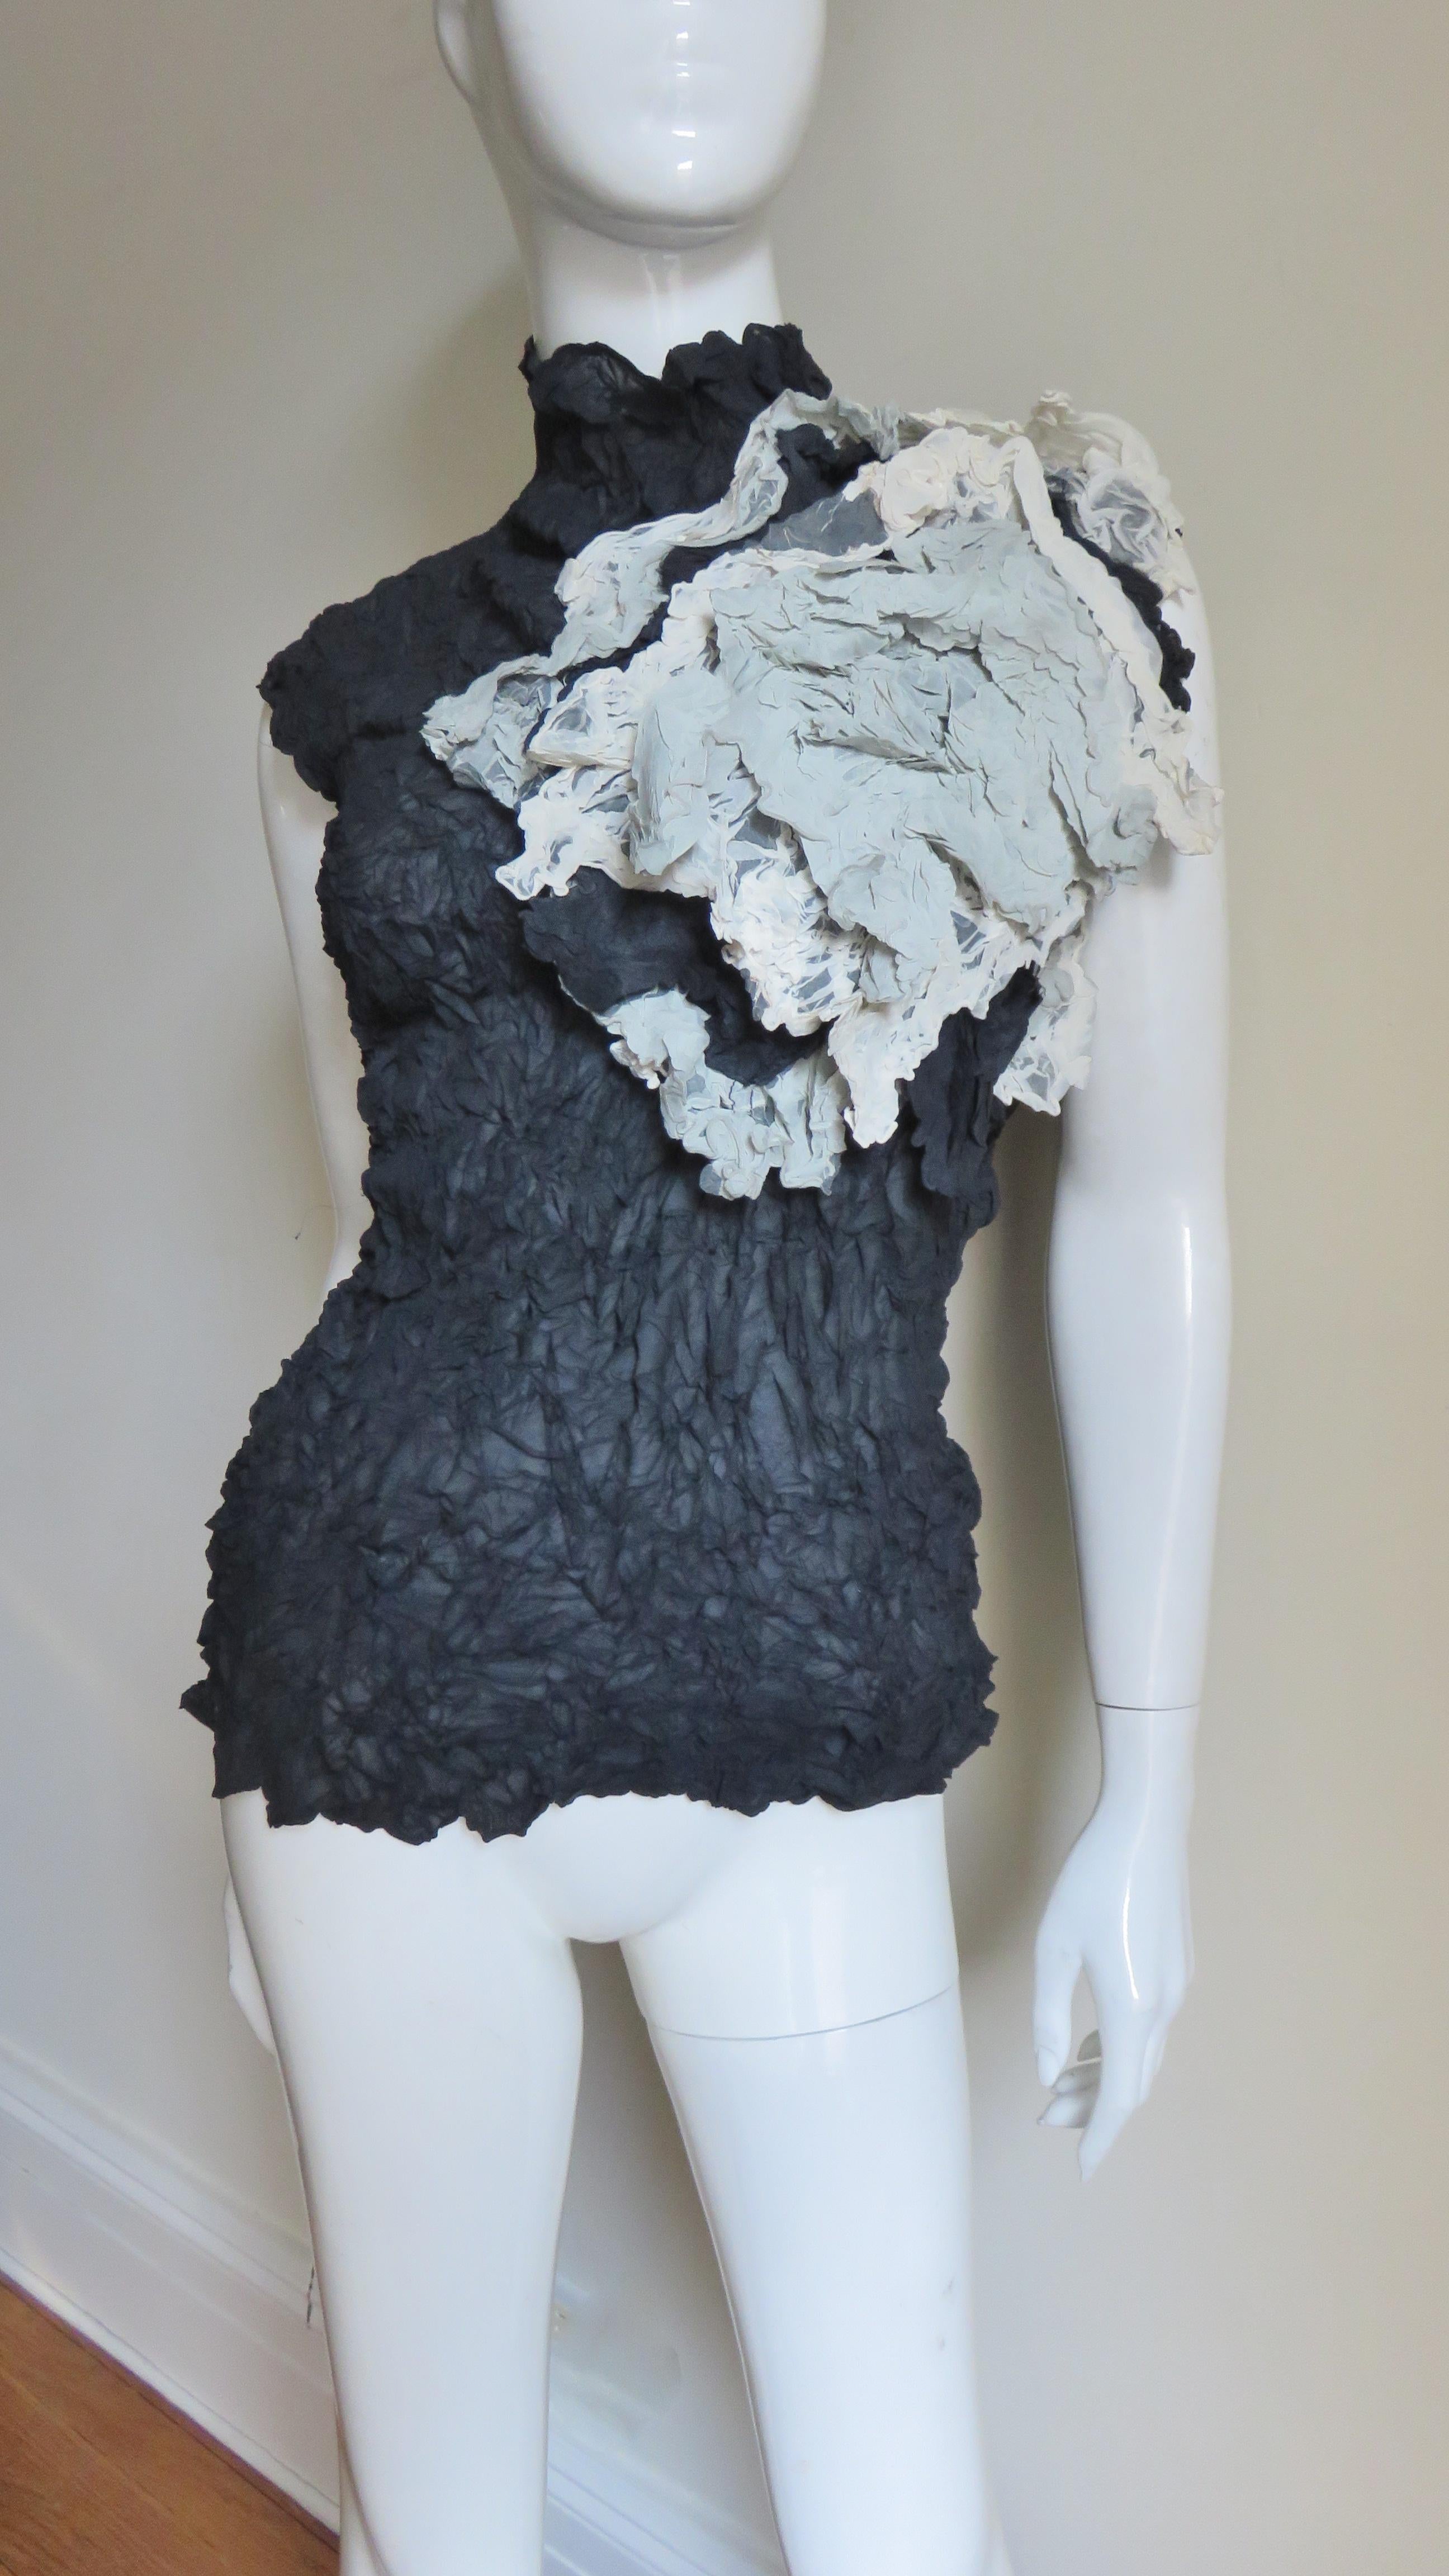 A fabulous black and grey top from Issey Miyake.  It is sleeveless with a stand up collar and semi fitted body. Off center at one shoulder is an elaborate, abstract pale taupe and grey layered flower applique.  It is very flexible in fit and slips